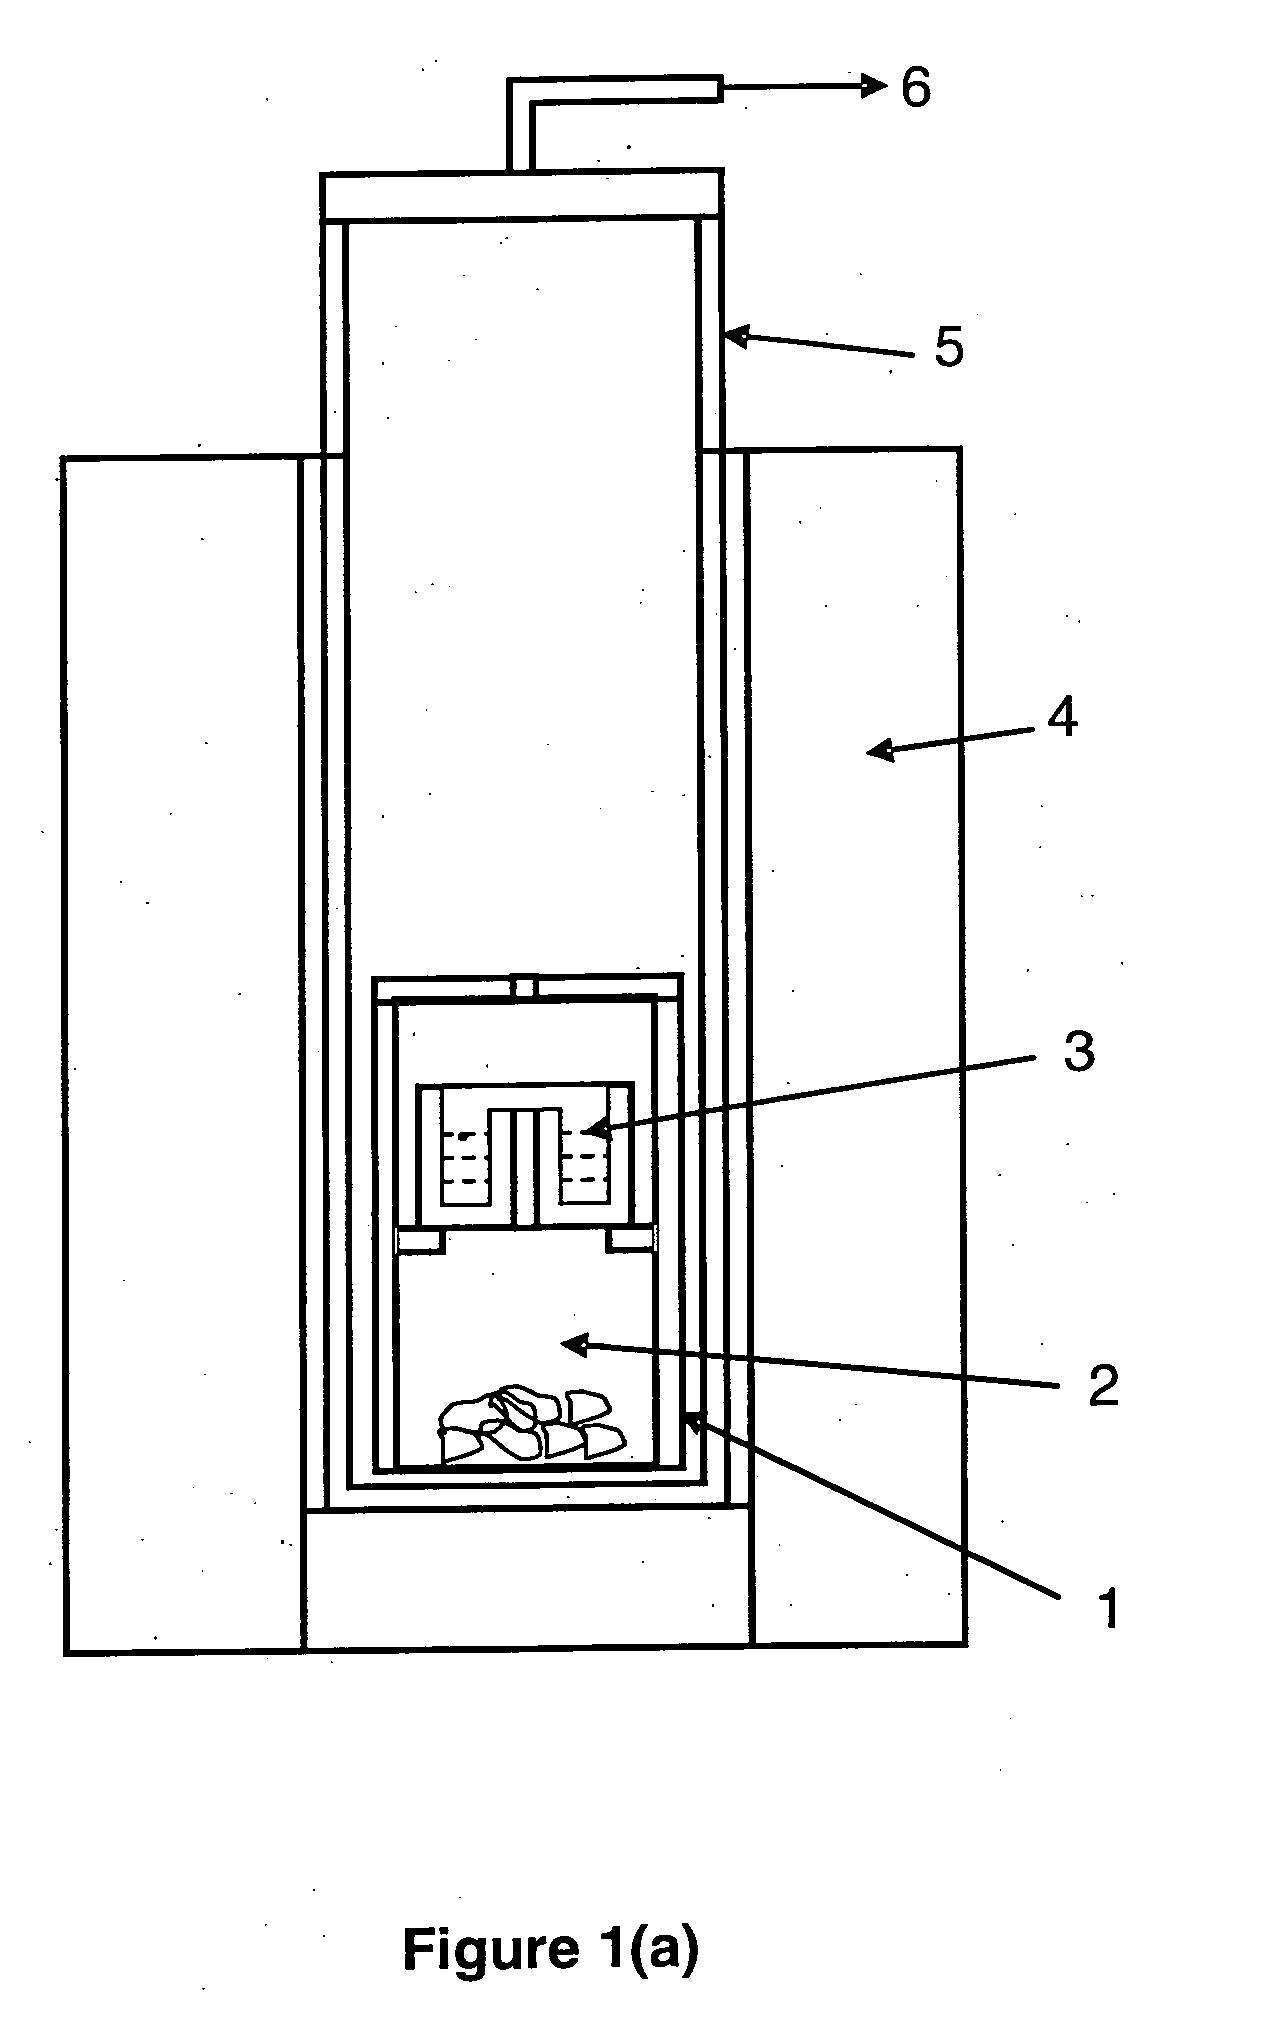 Method for purification of metal based alloy and intermetallic powders